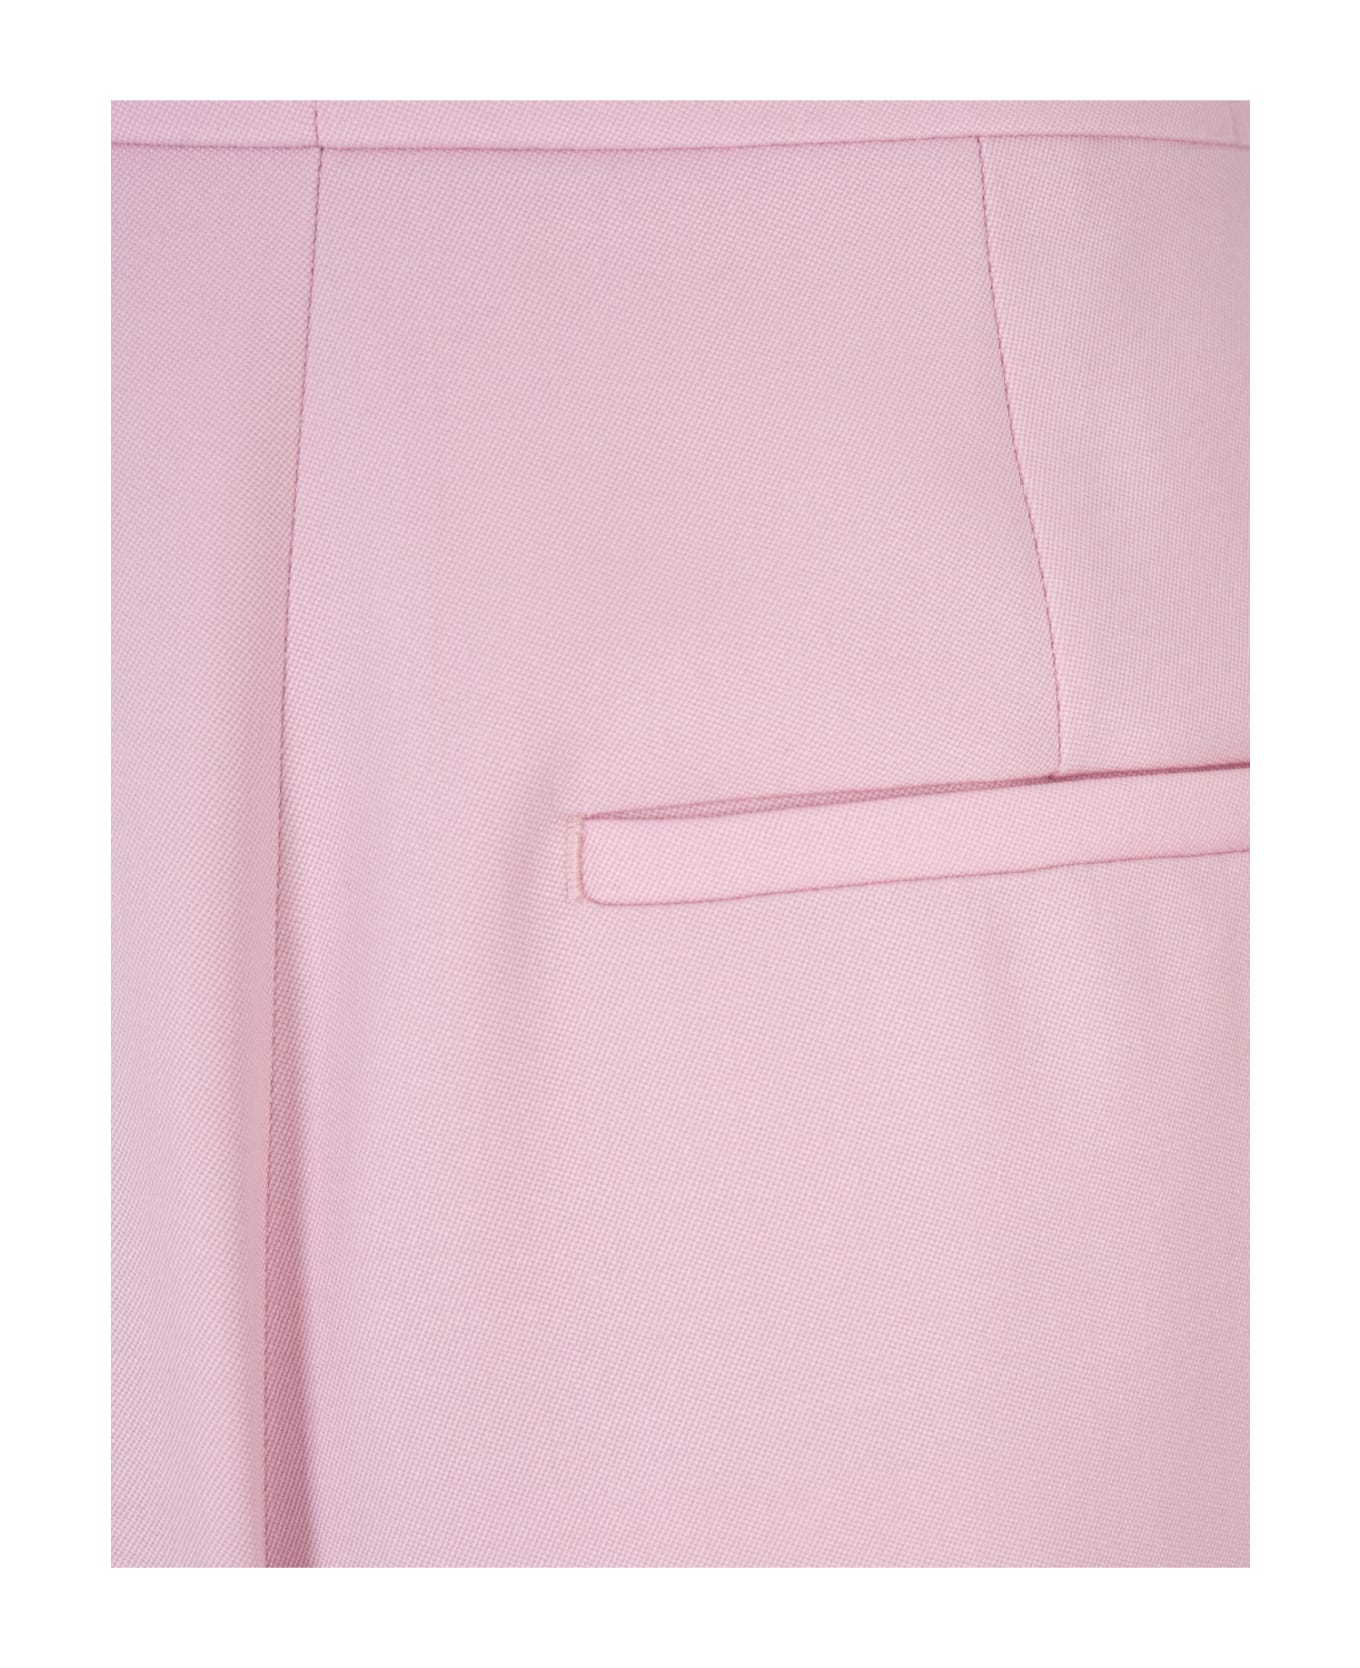 Alexander McQueen Wide Leg Trousers With Double Pleat In Light Pink - Pink